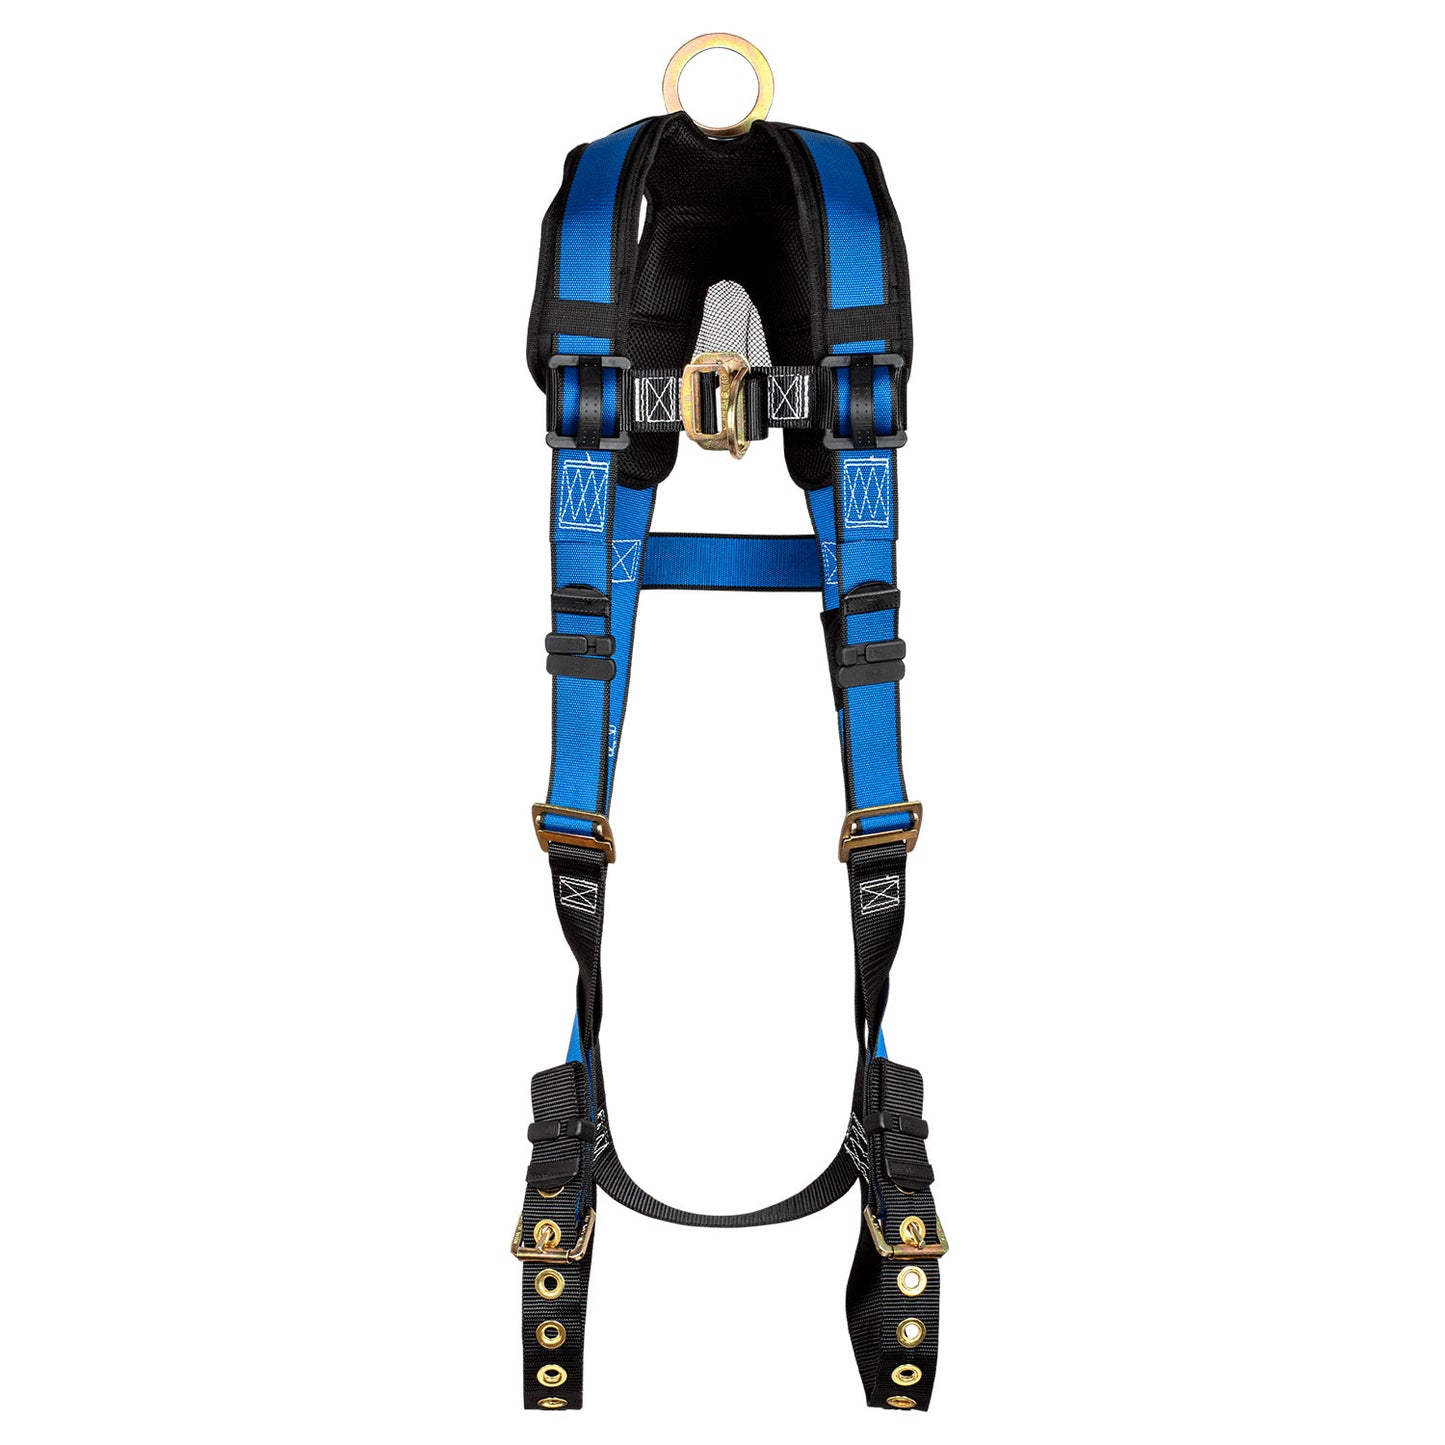 FallTech Contractor+ Full-Body Climbing Harness | Non-Belted | M | 7016BFDM